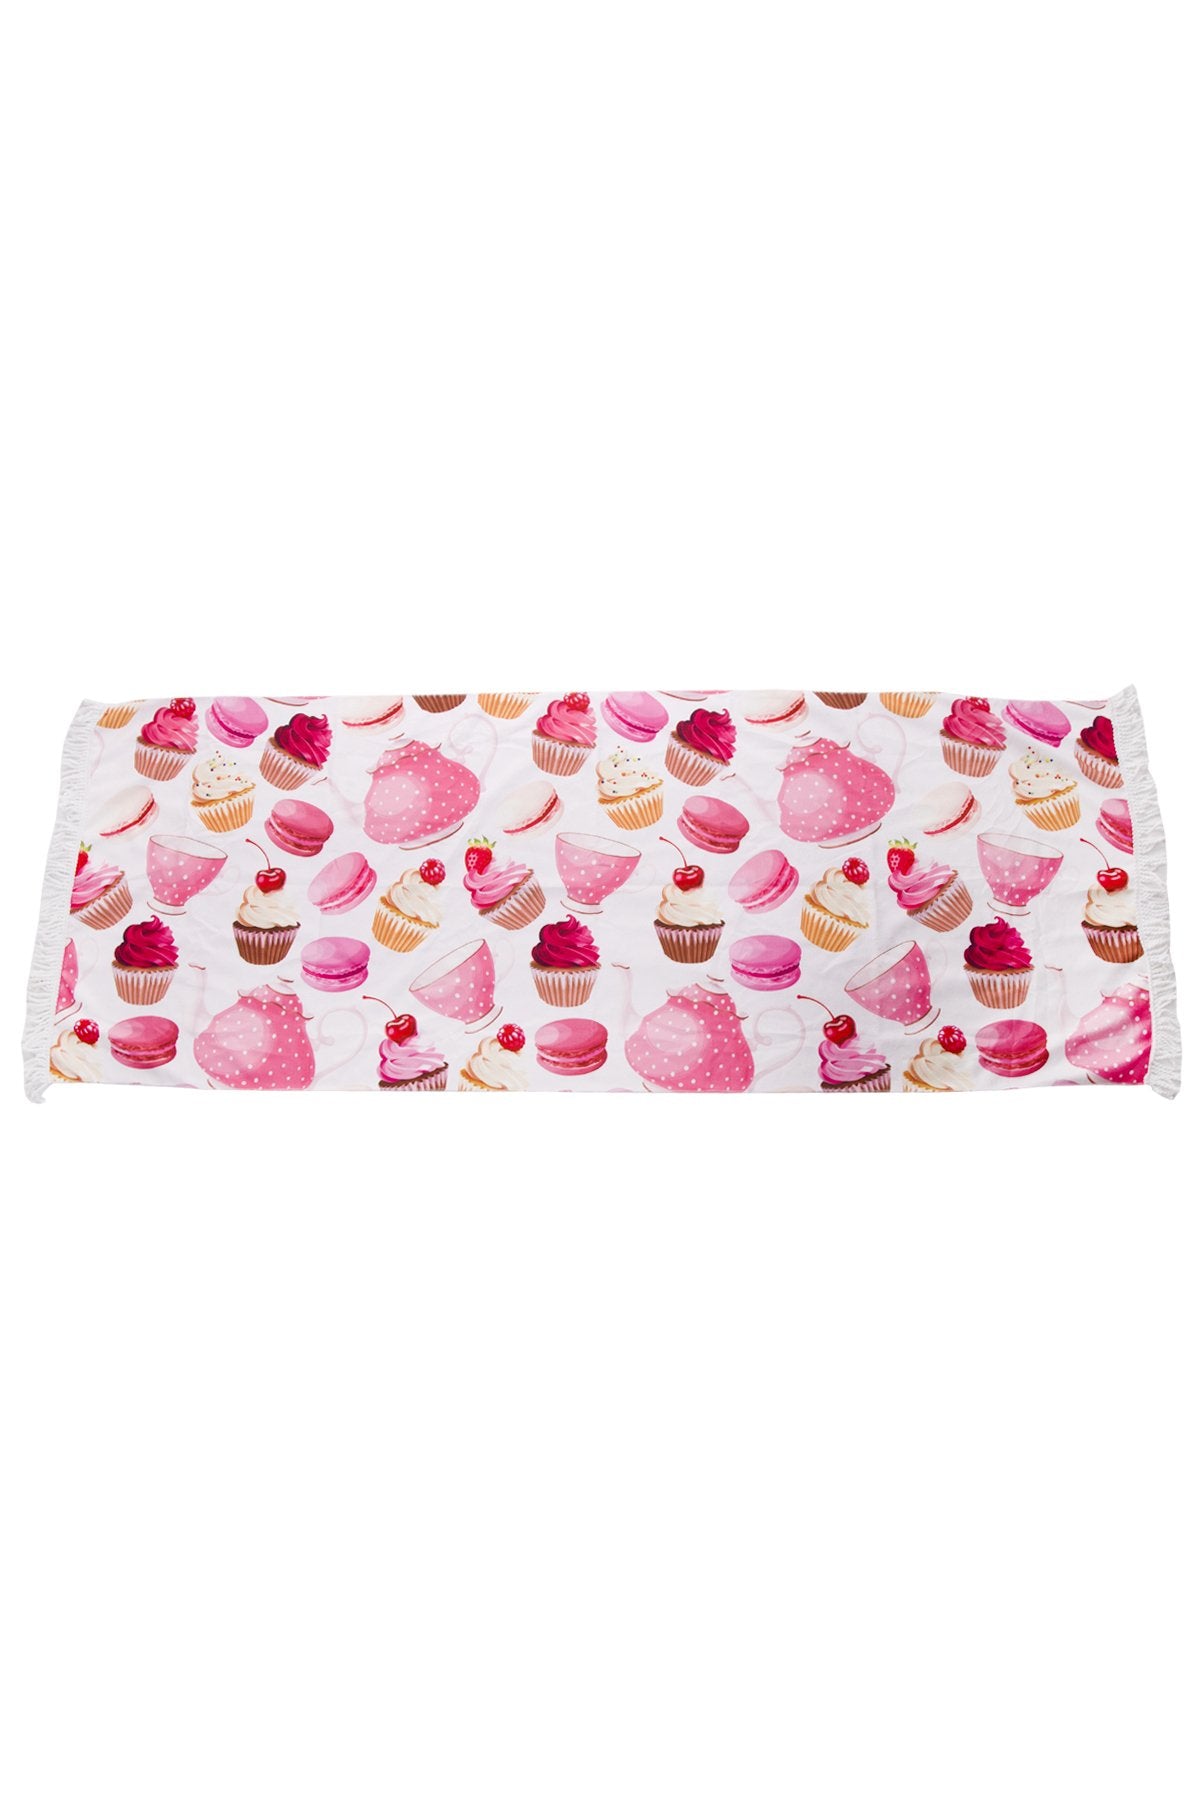 Cupcakes Print Wholesale Rectangle Beach Towel With Fringes 